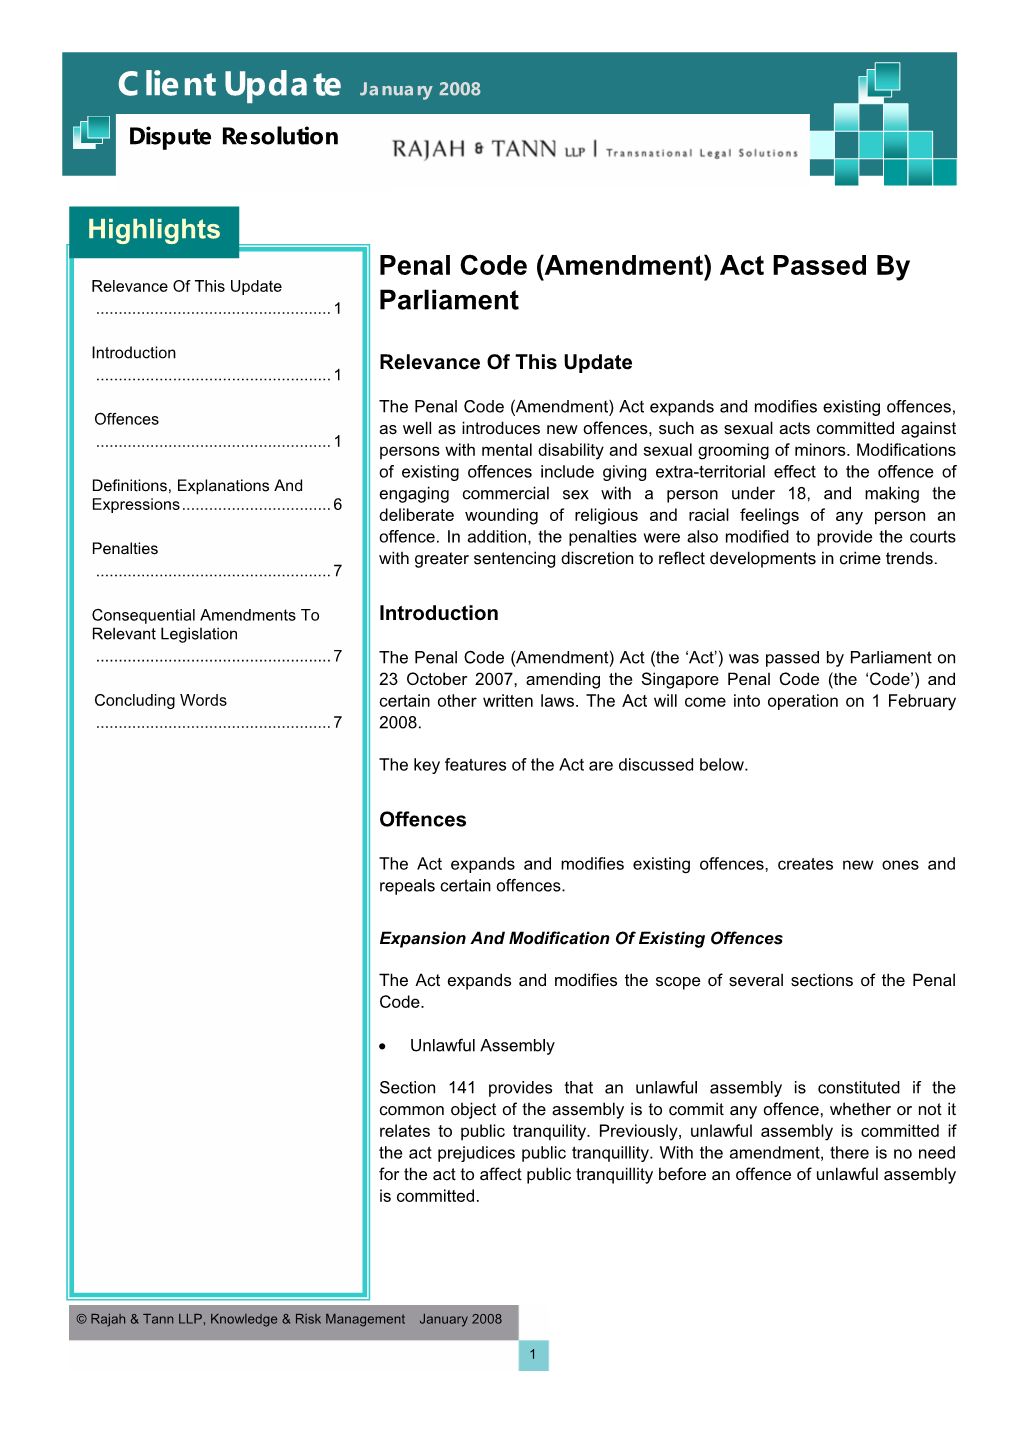 Penal Code (Amendment) Act Passed by Parliament